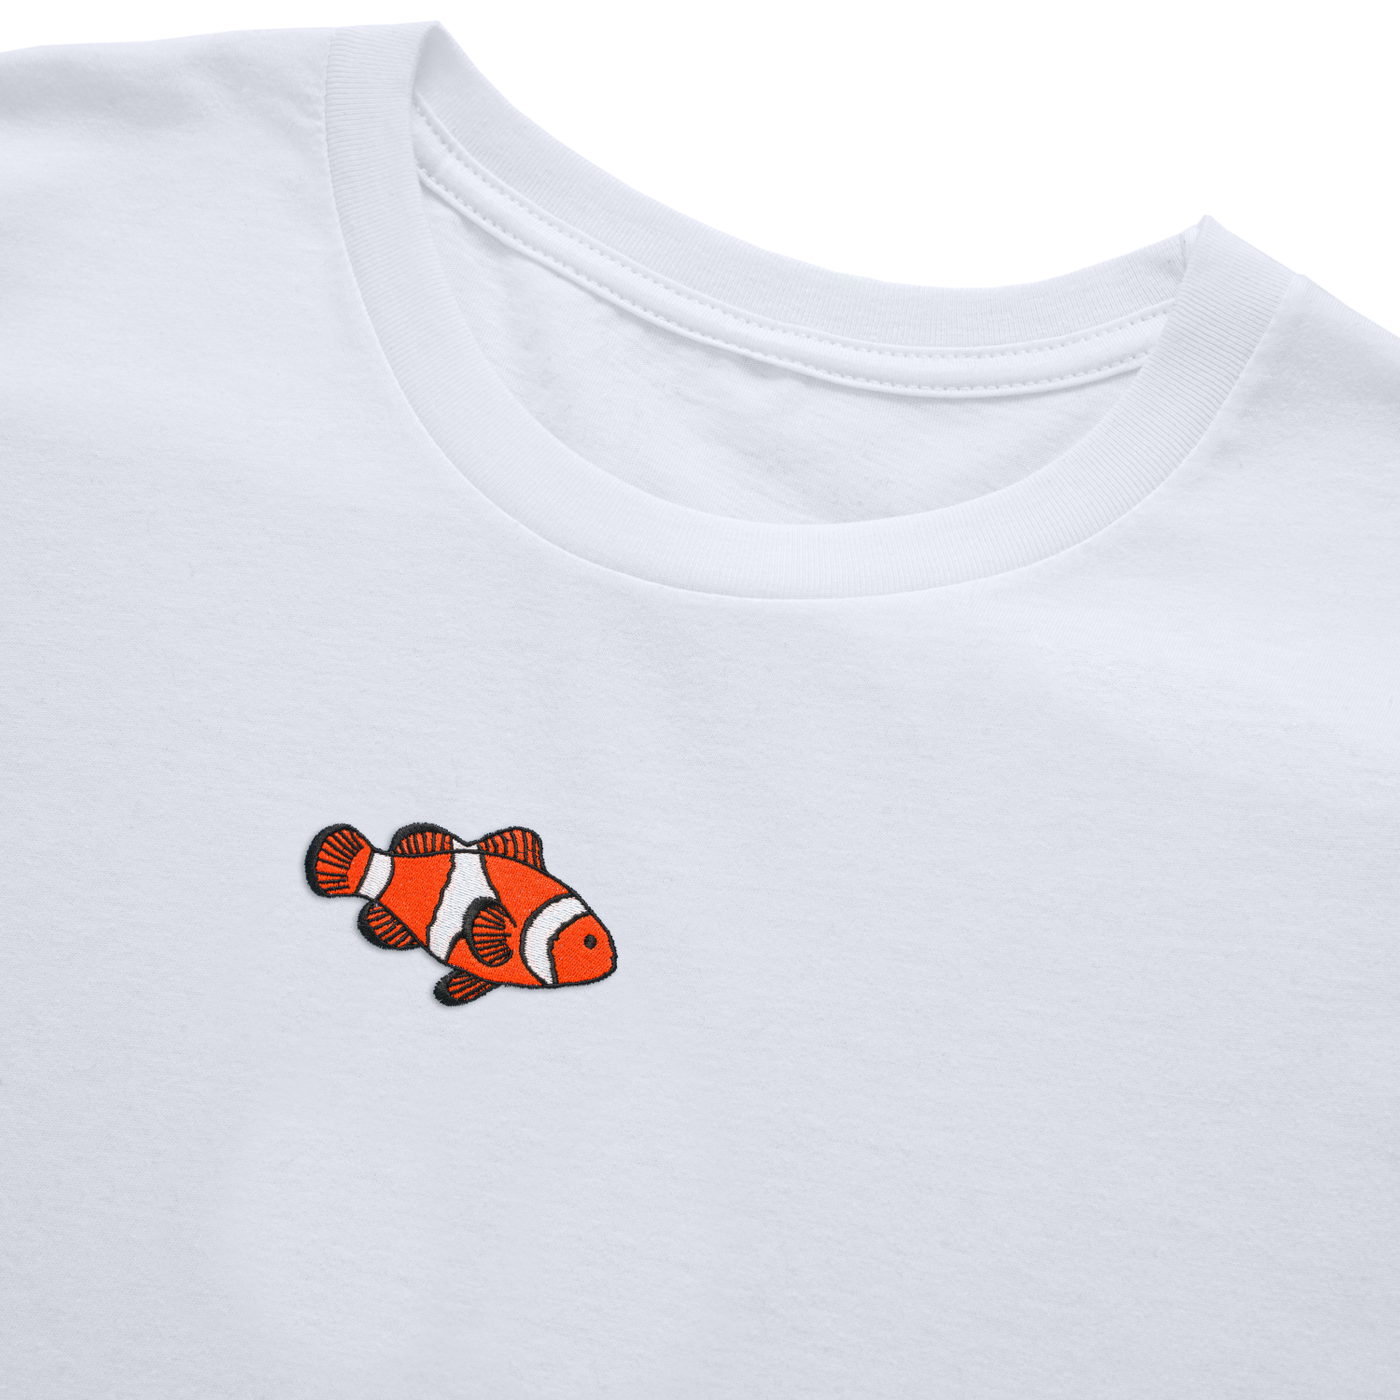 Bobby's Planet Women's Embroidered Clownfish Long Sleeve Shirt from Seven Seas Fish Animals Collection in White Color#color_white